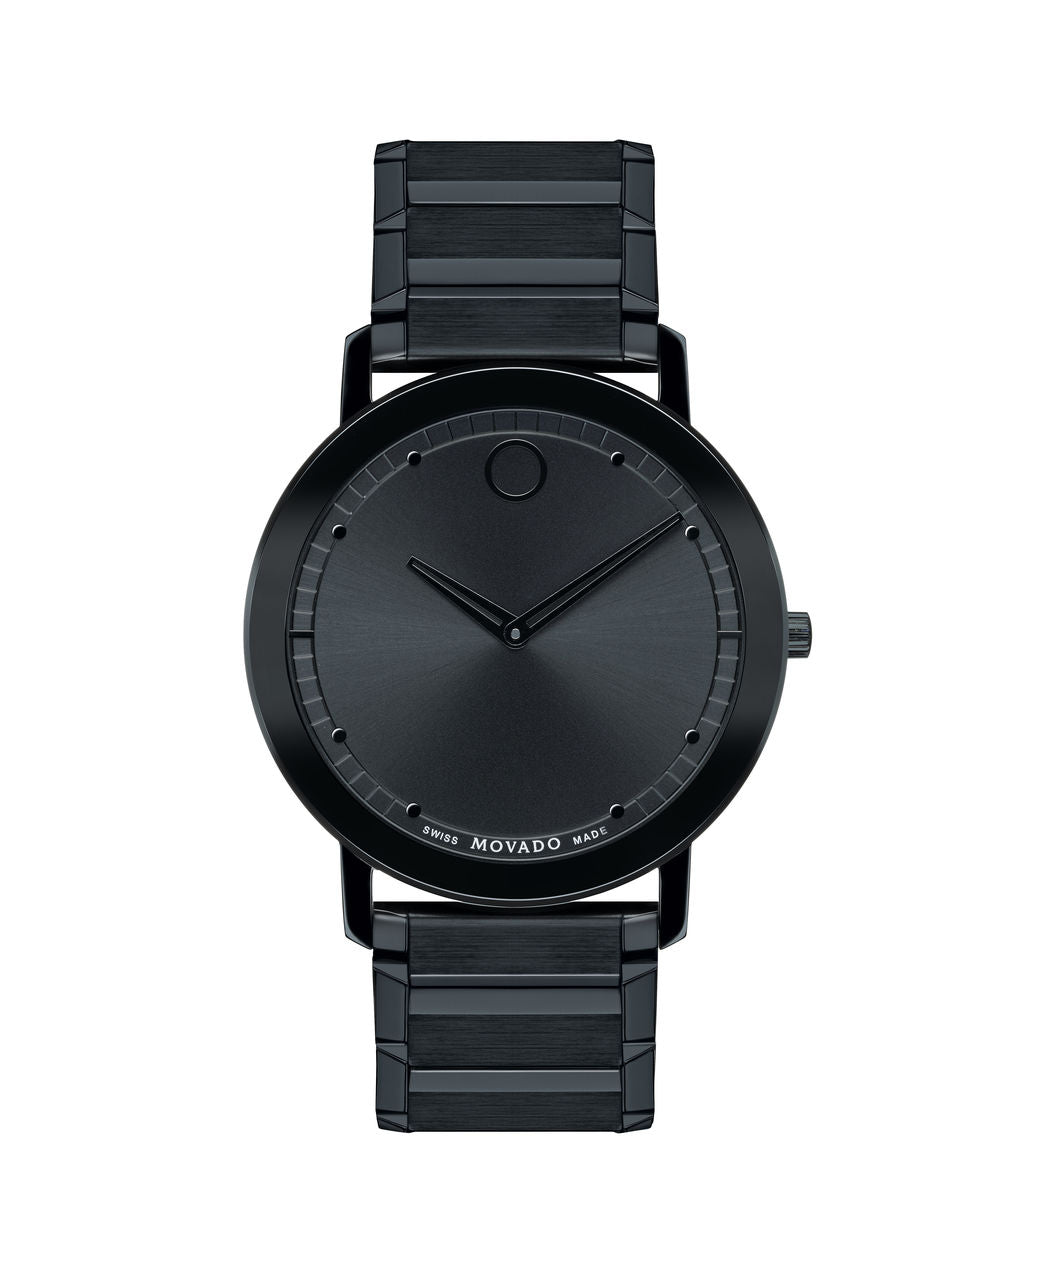 Movado Watch Sapphire Collection - Black Steel